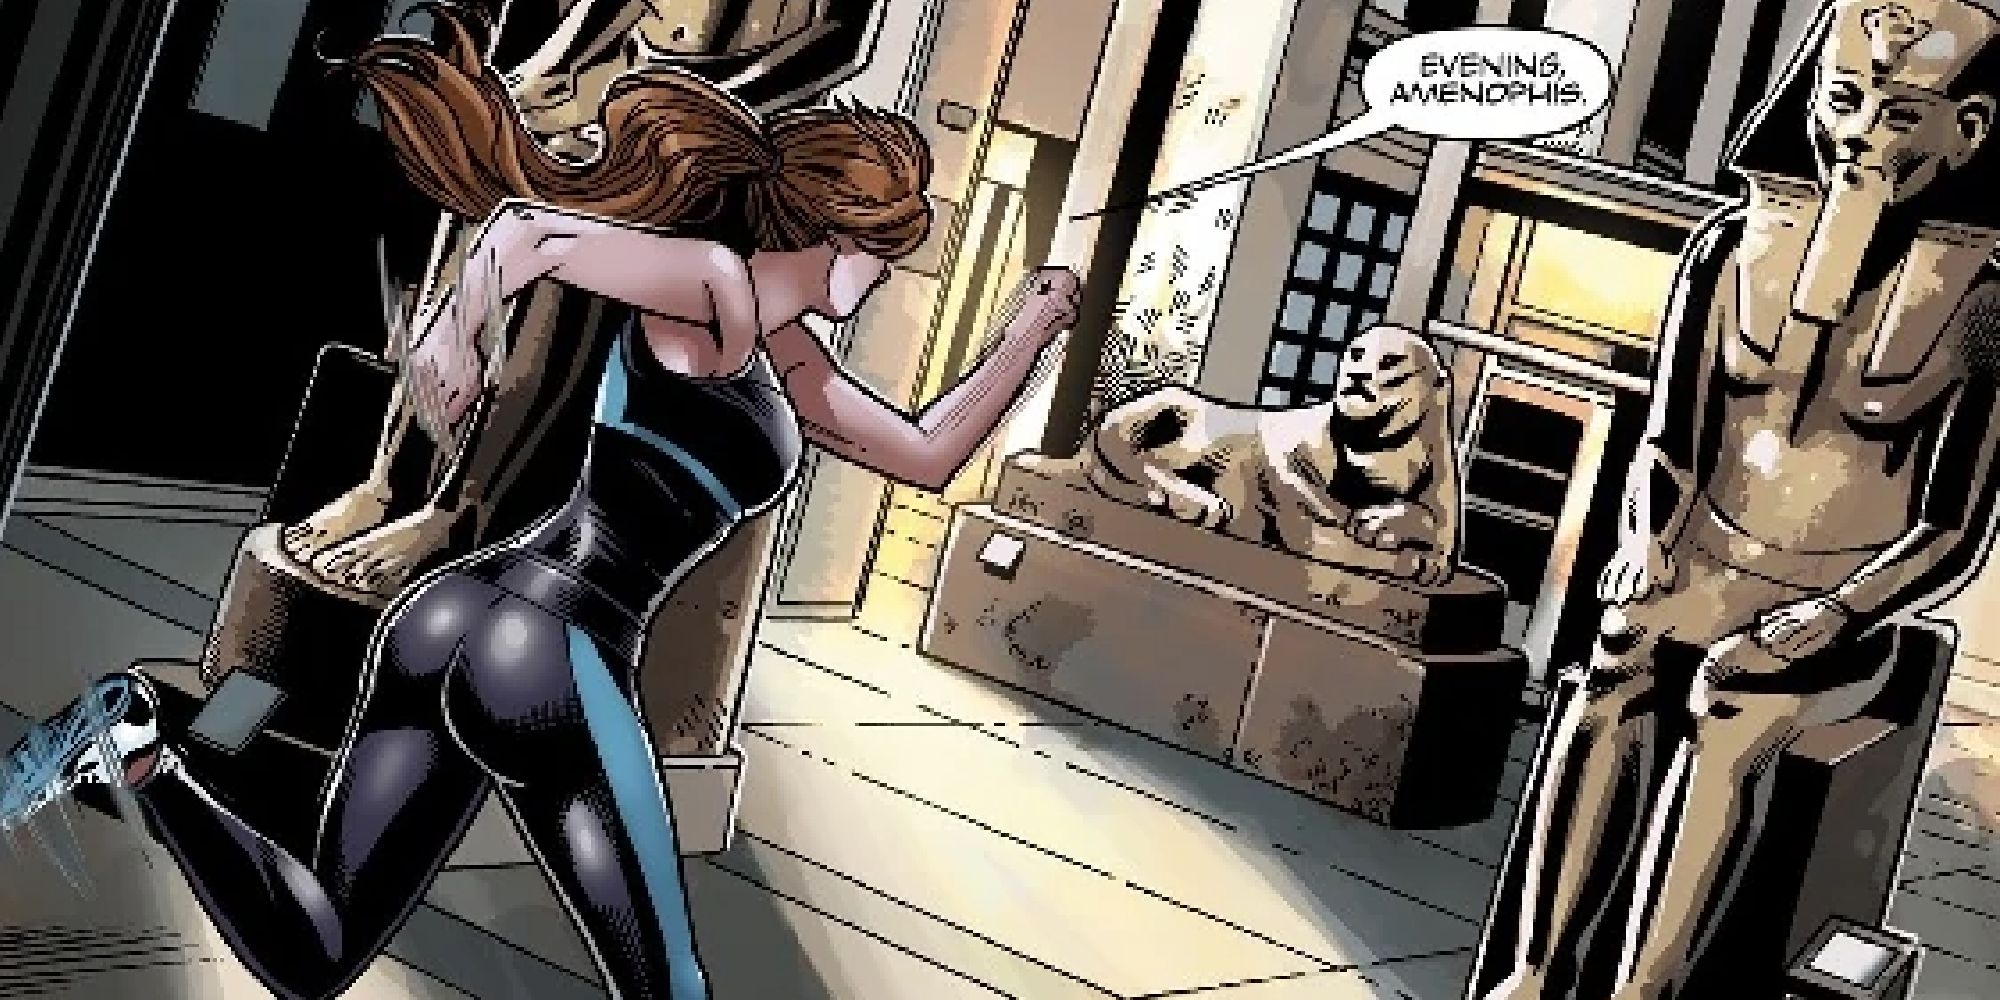 Lara races past Egyptian statues in a museum in one of the Dark Horse comic arcs